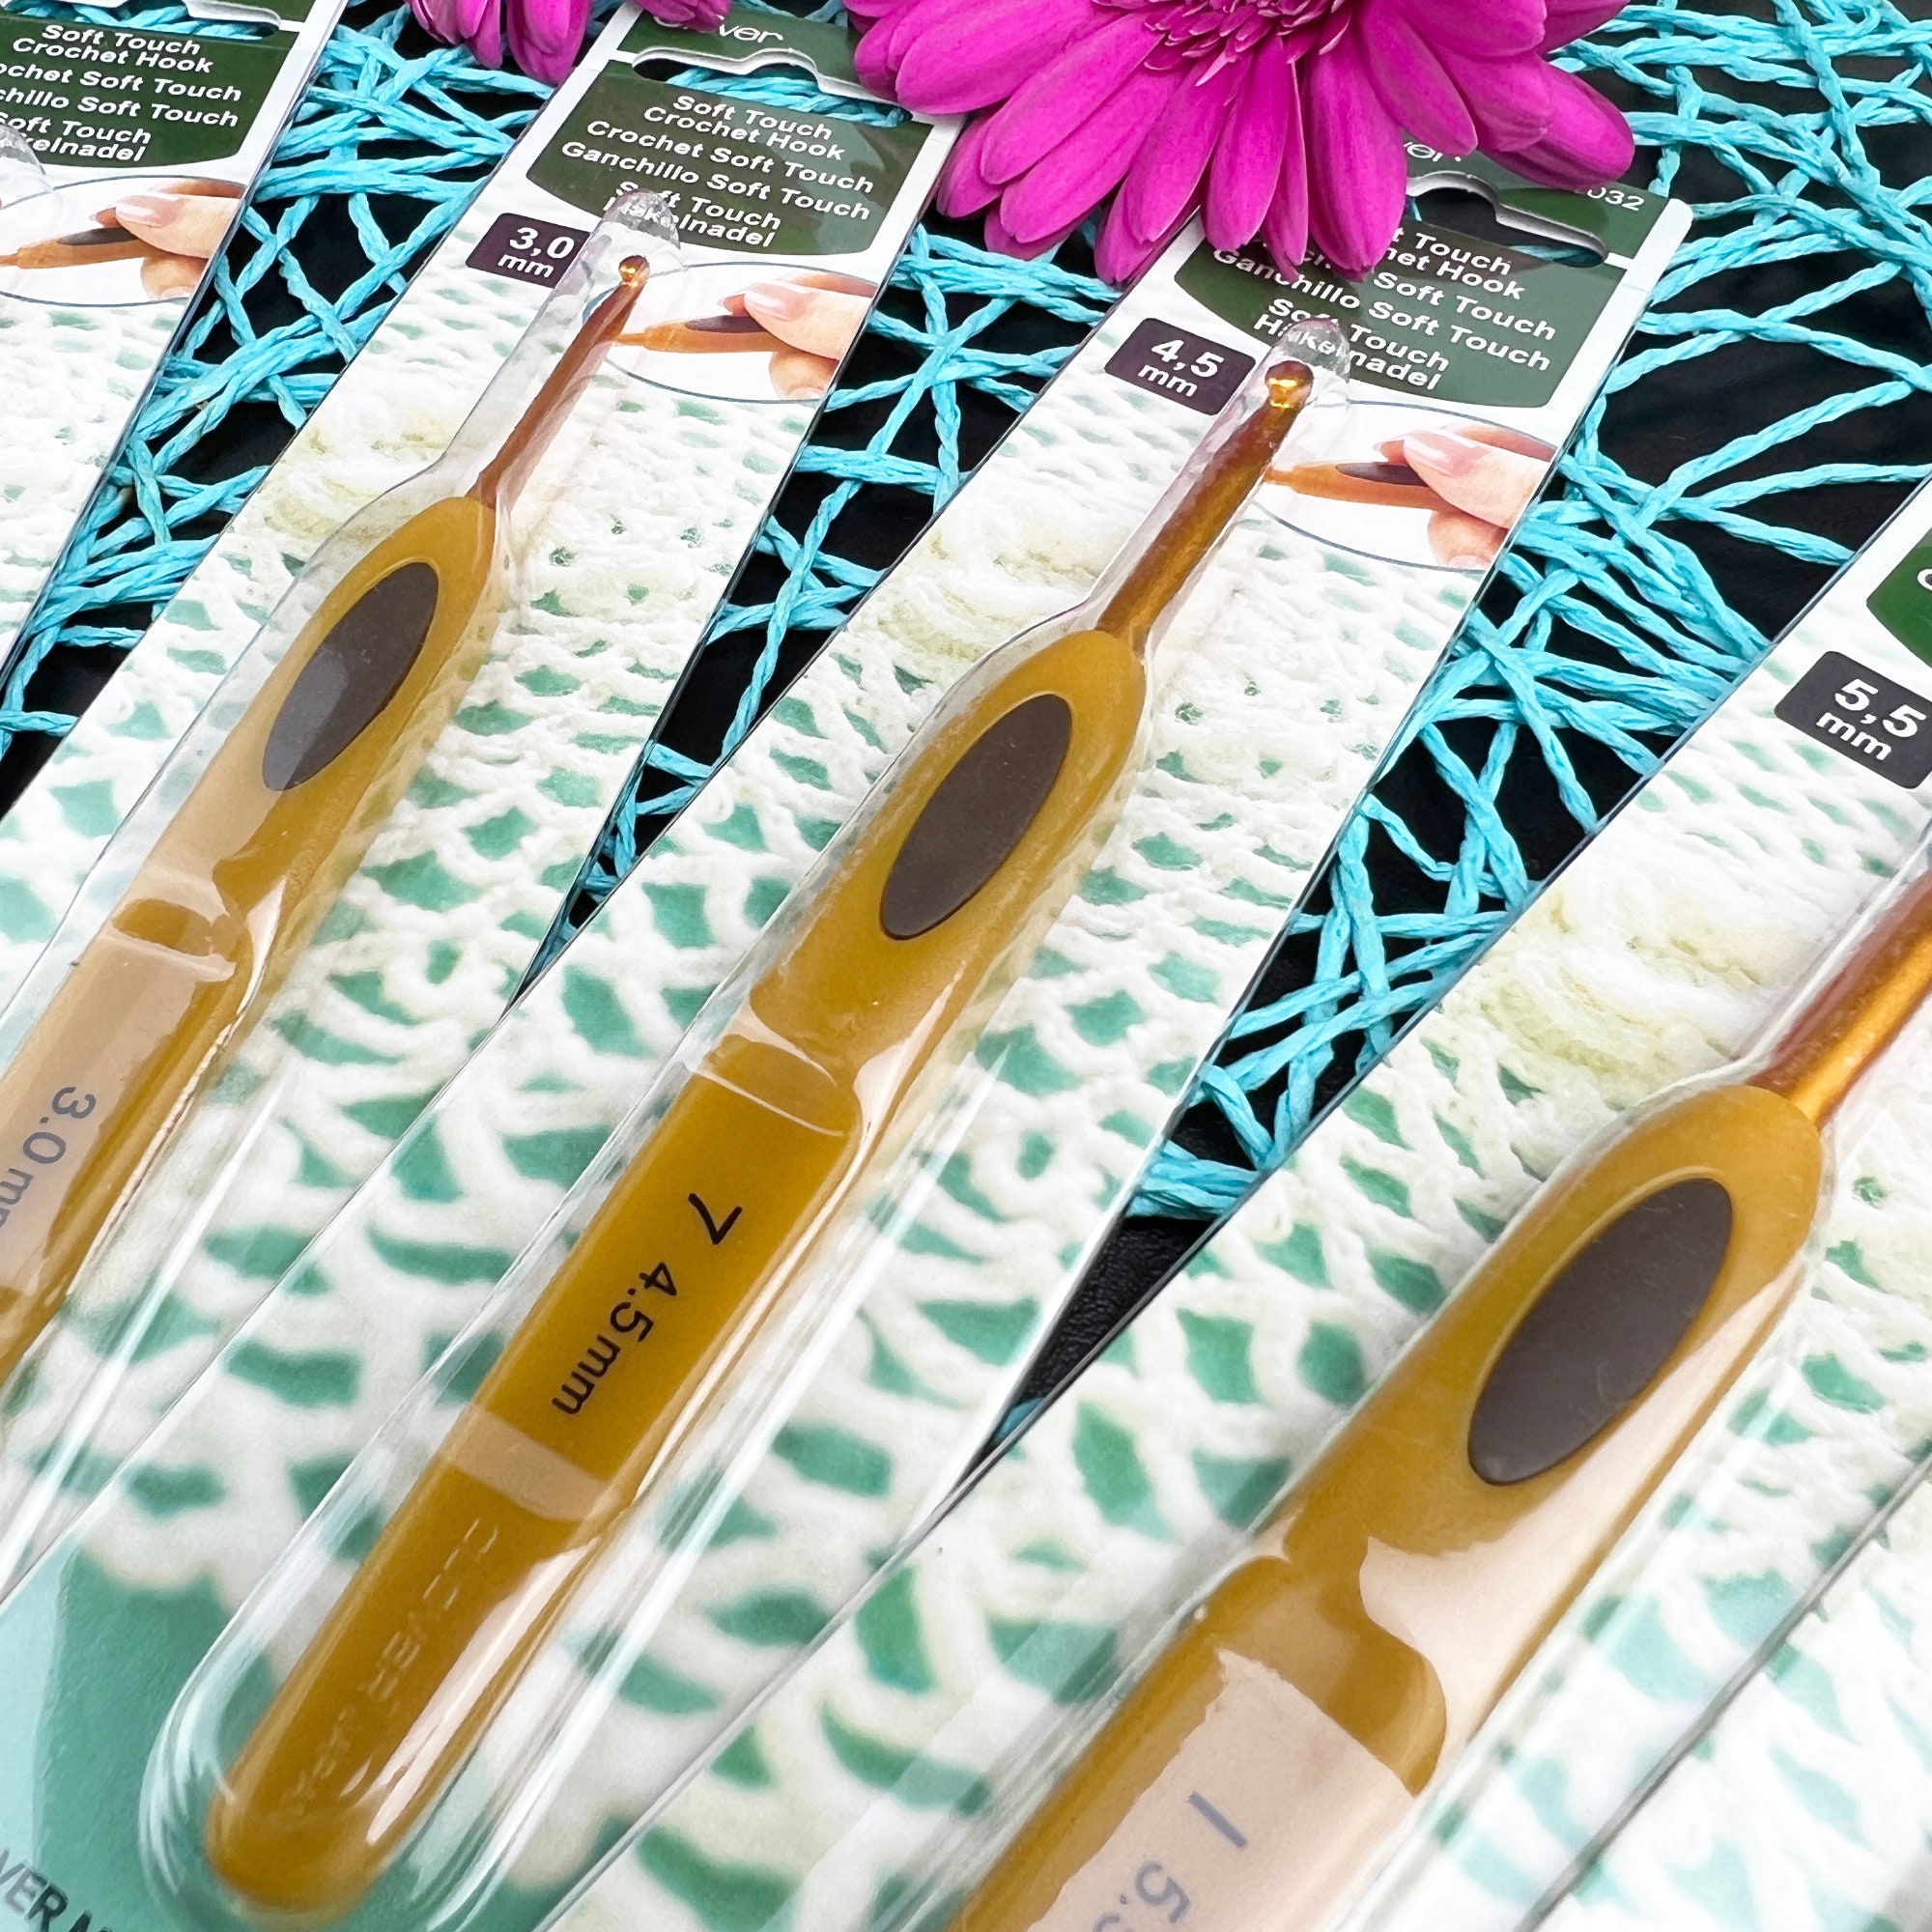 Soft Ergonomic Crochet Hooks Sizes F, G, H. Susan Bates Silvalume 6.25 With  an Aluminum In-line Head and Round Soft Handles. 3pc 12693 